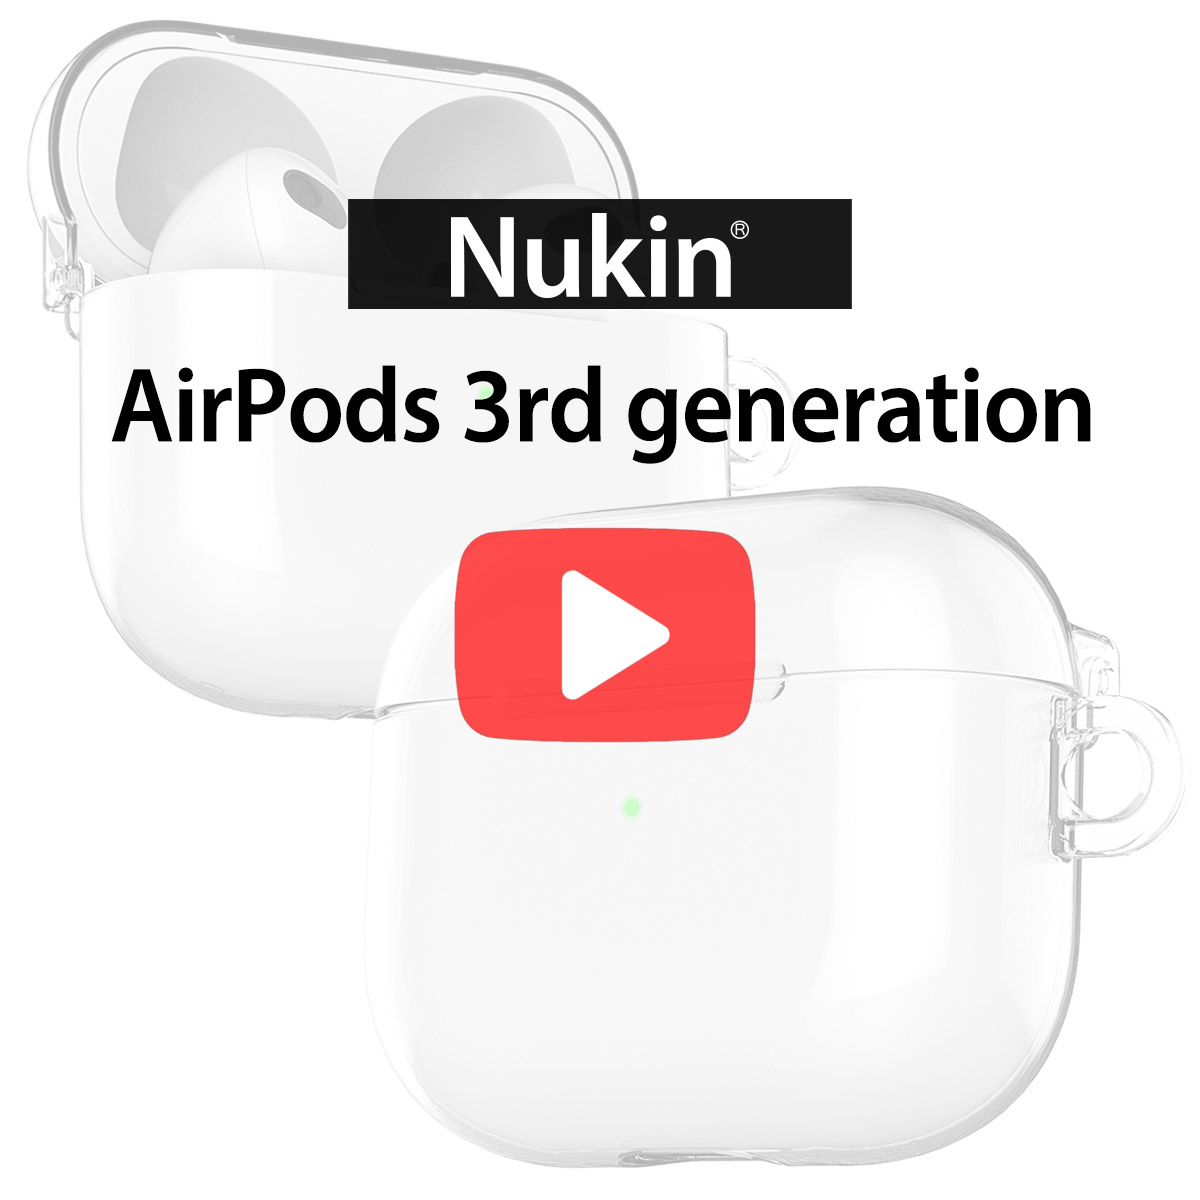 [AirPods 3rd generation] NUKIN